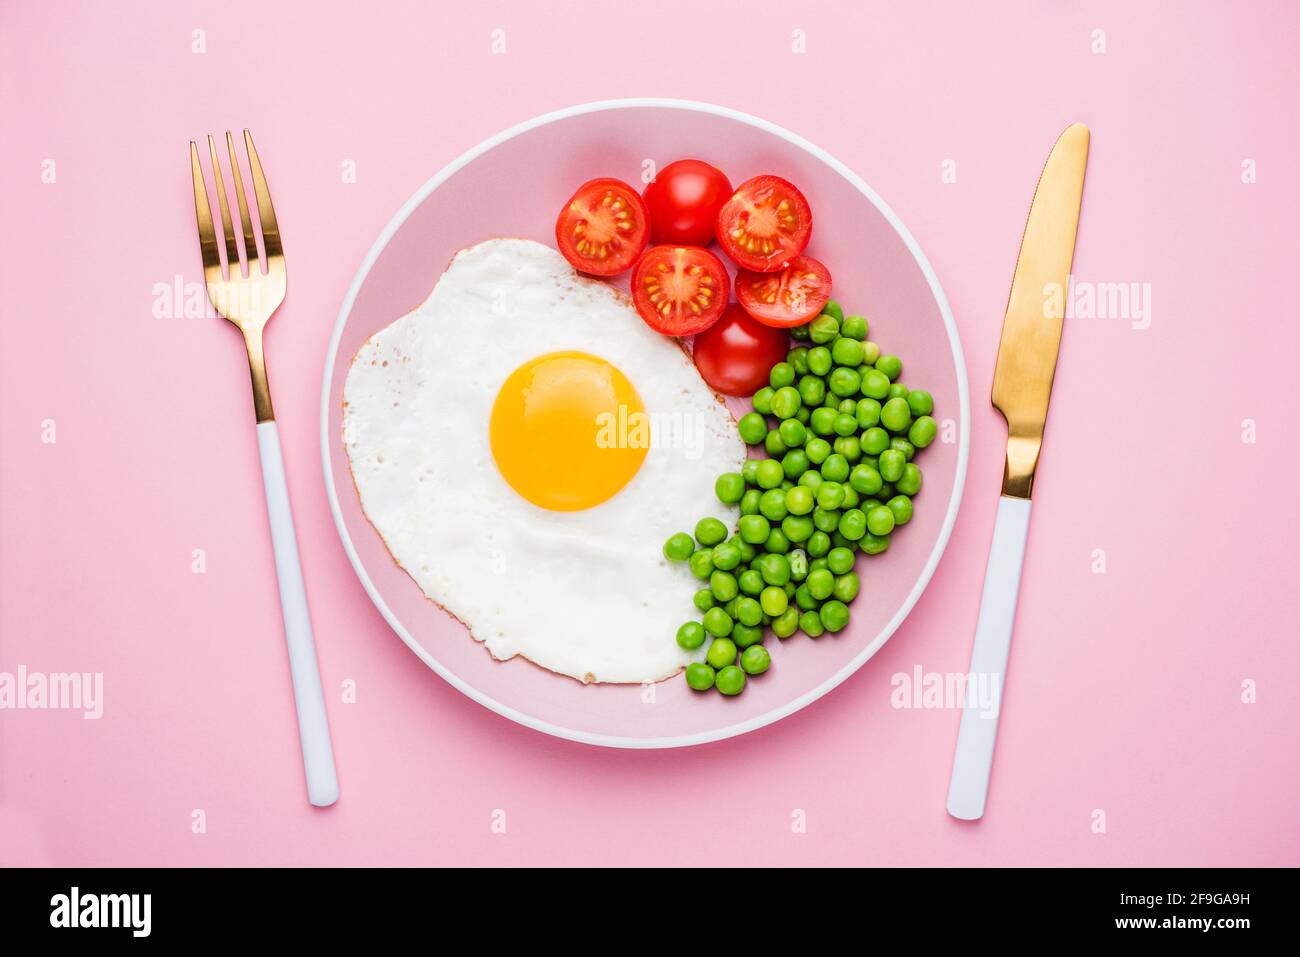 Fried egg with green peas and tomatoes on pink plate isolated on pink background. Healthy breakfast food Stock Photo